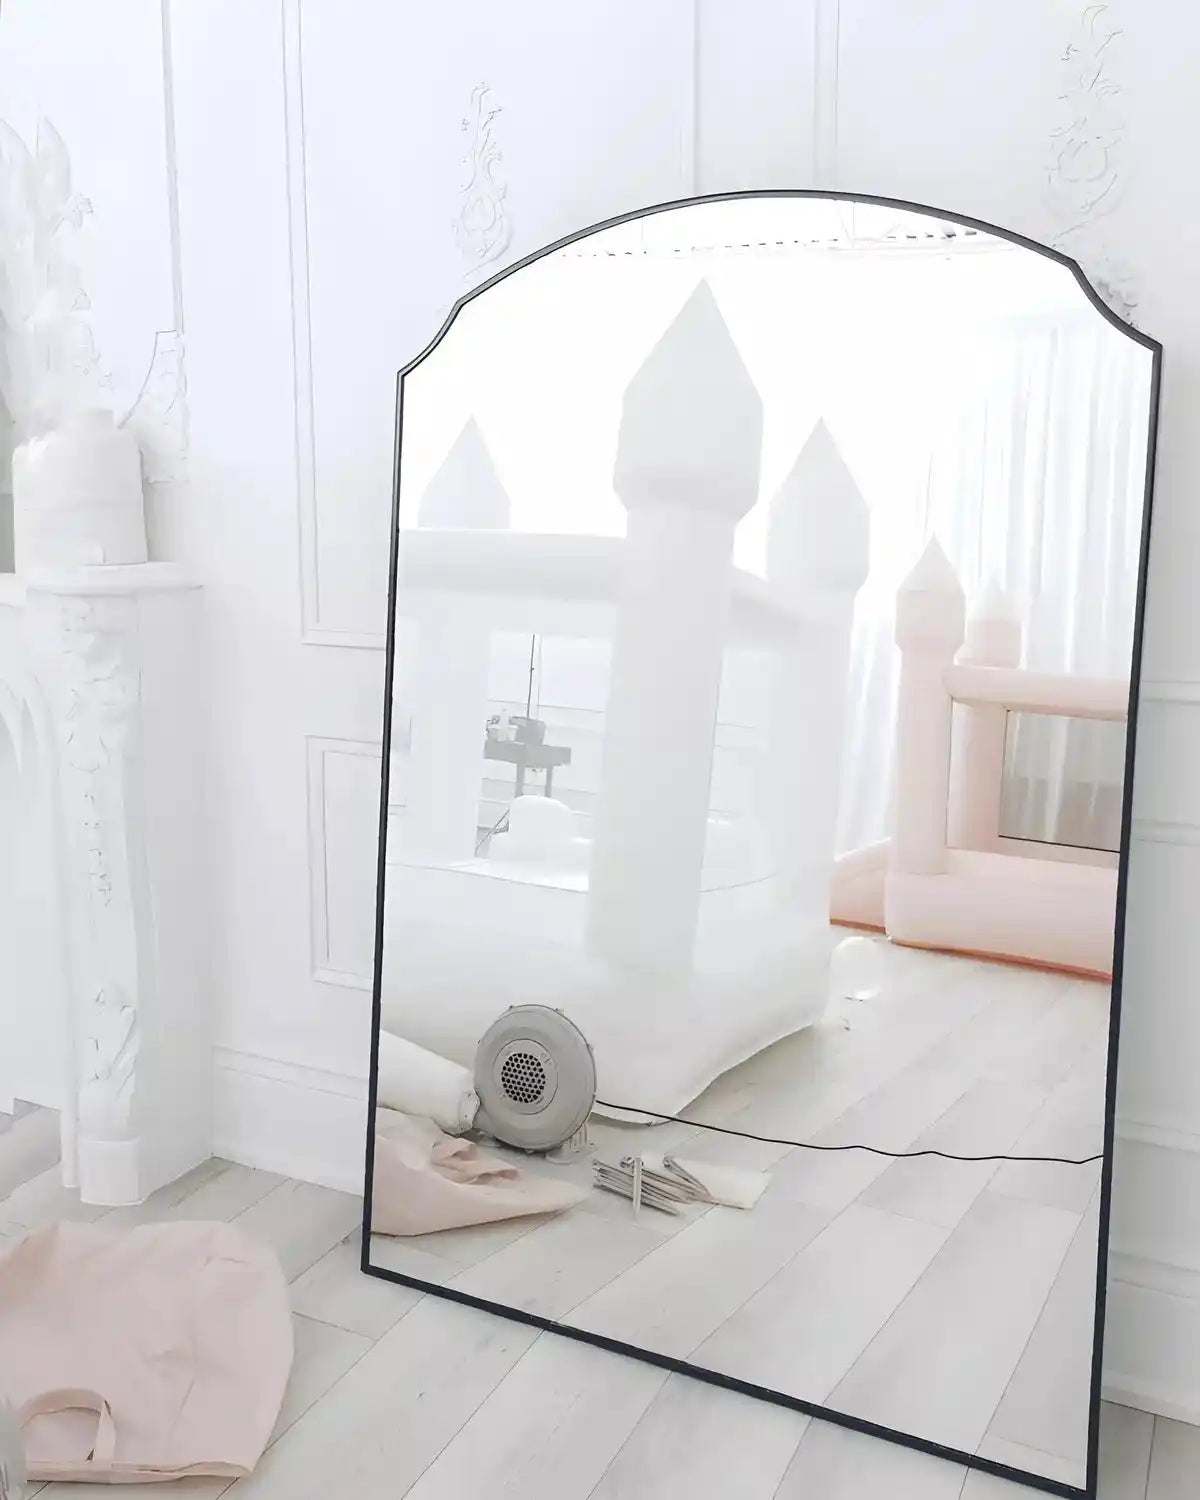 Reflection of tiny bounce houses, white and pink, in the mirror with accessories e.g. blower and tent pegs